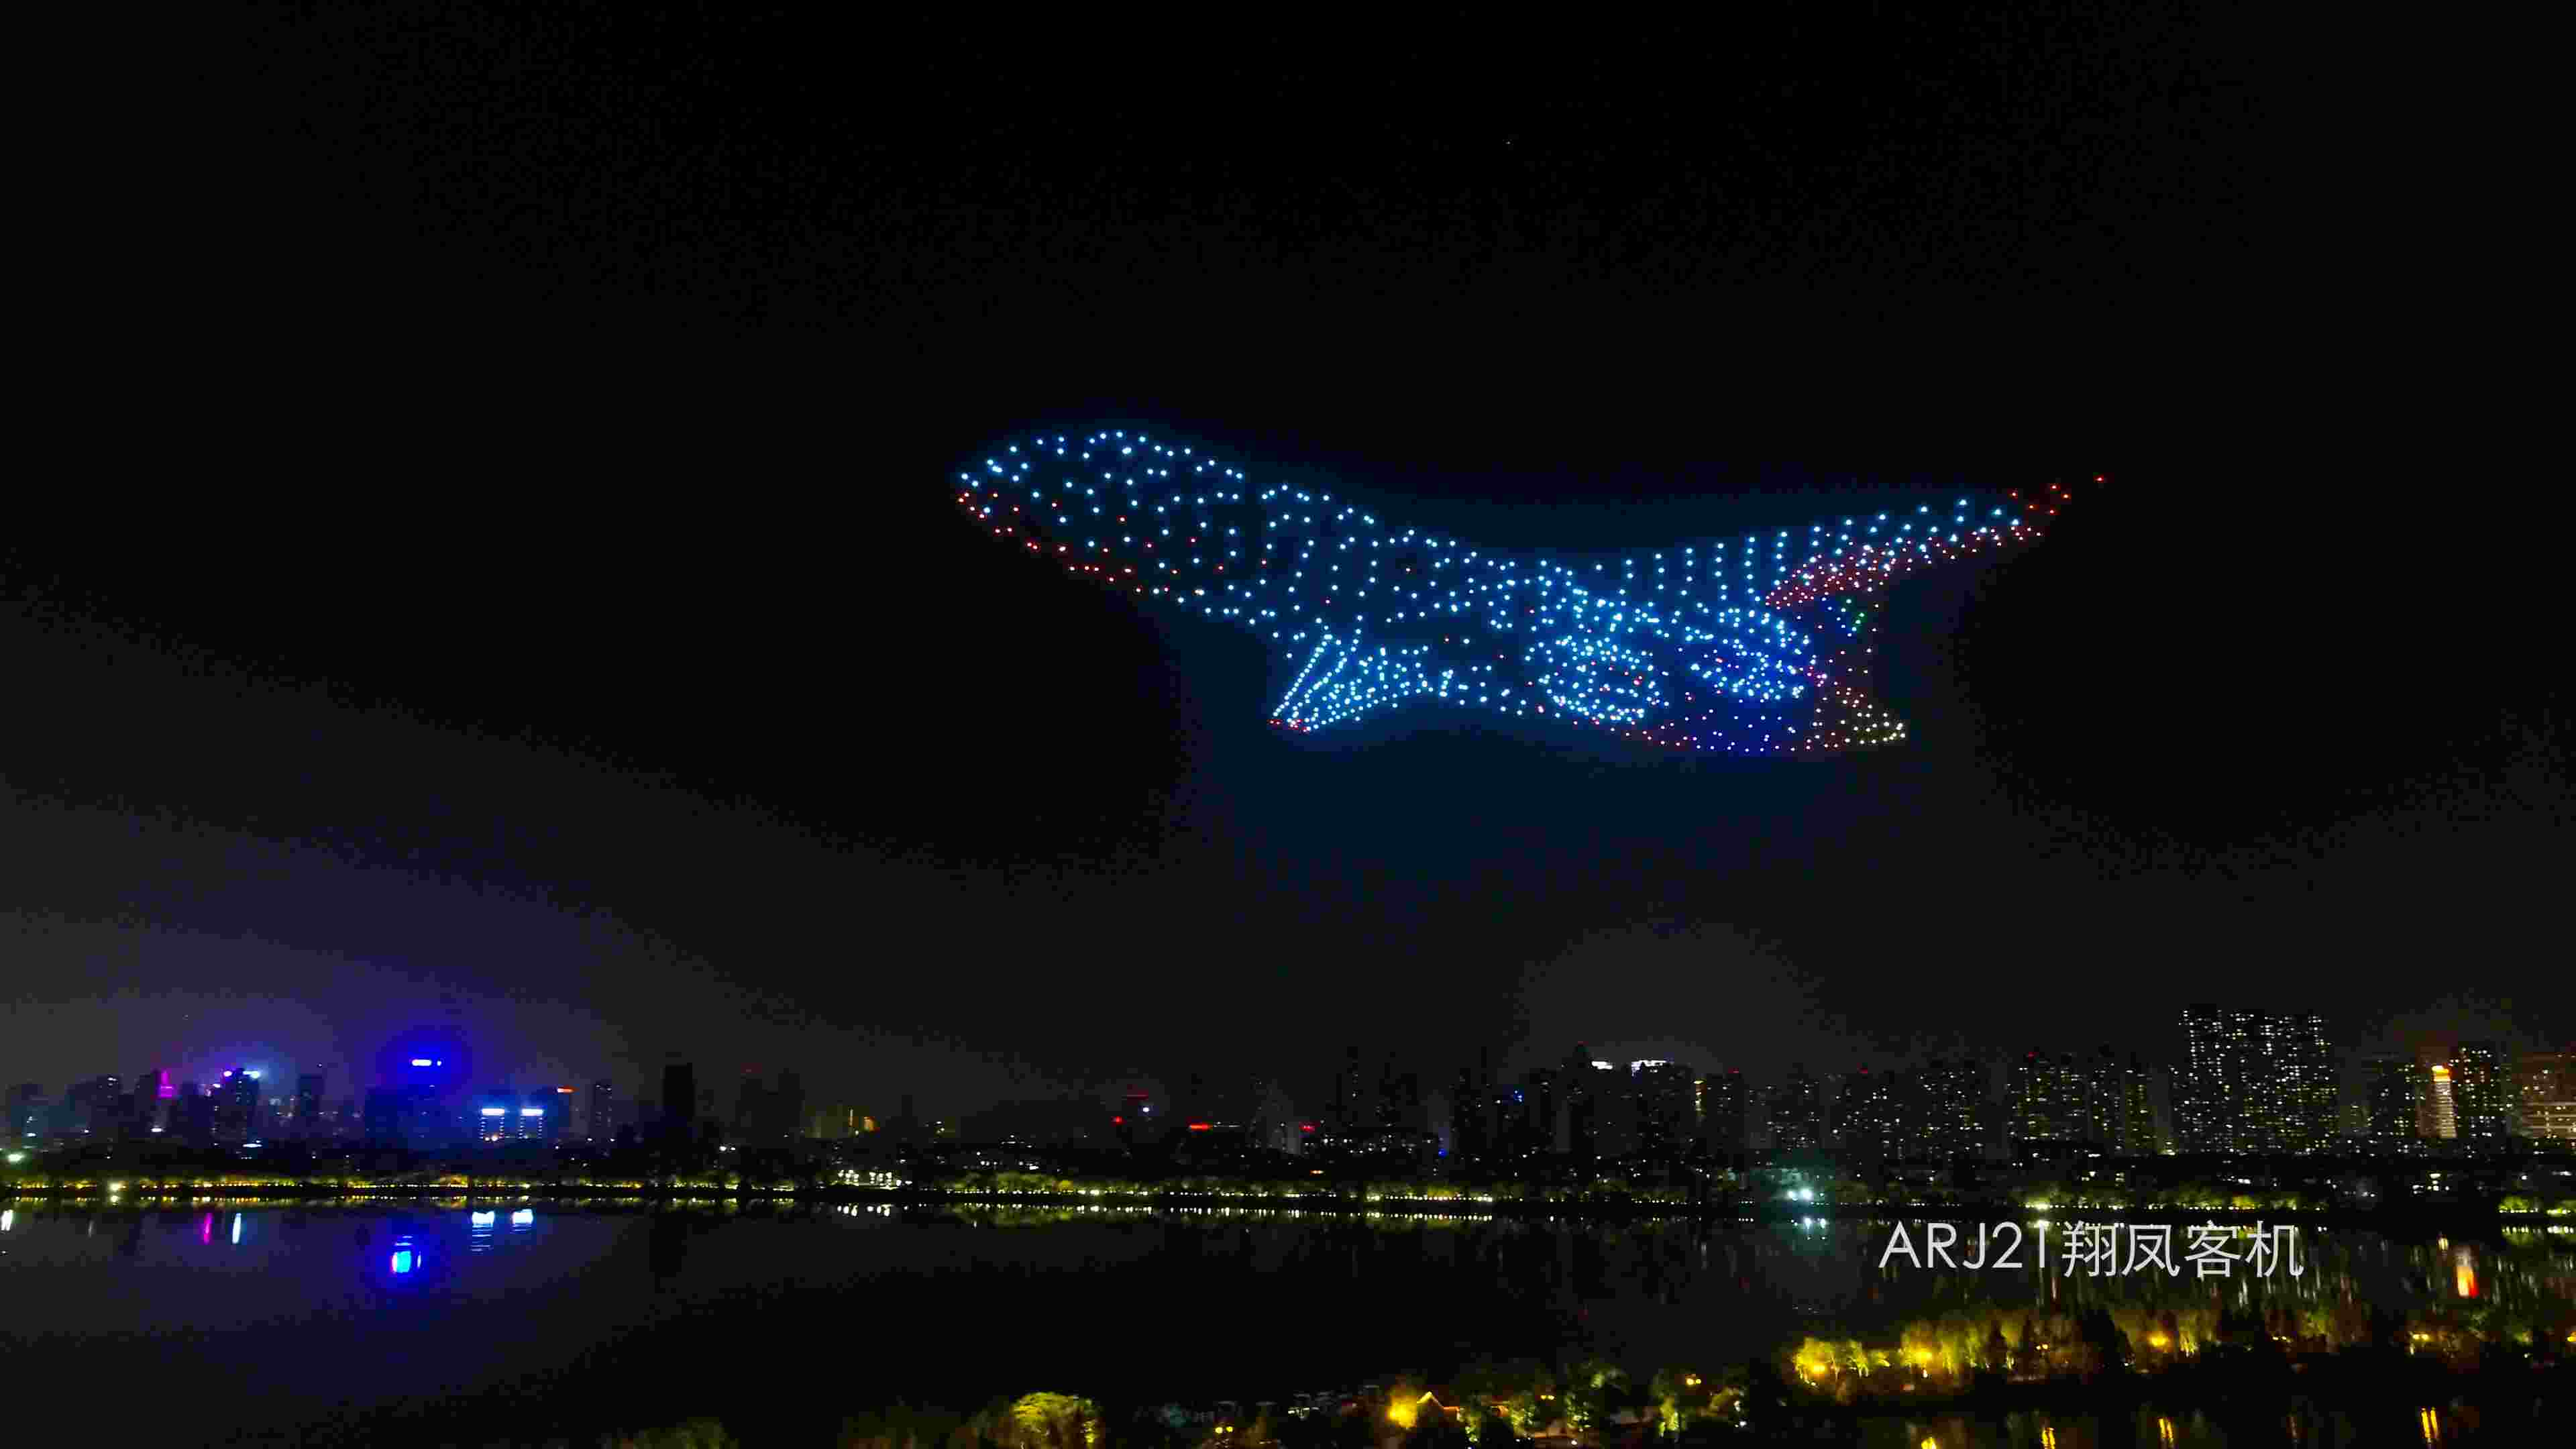 Formation drones light show